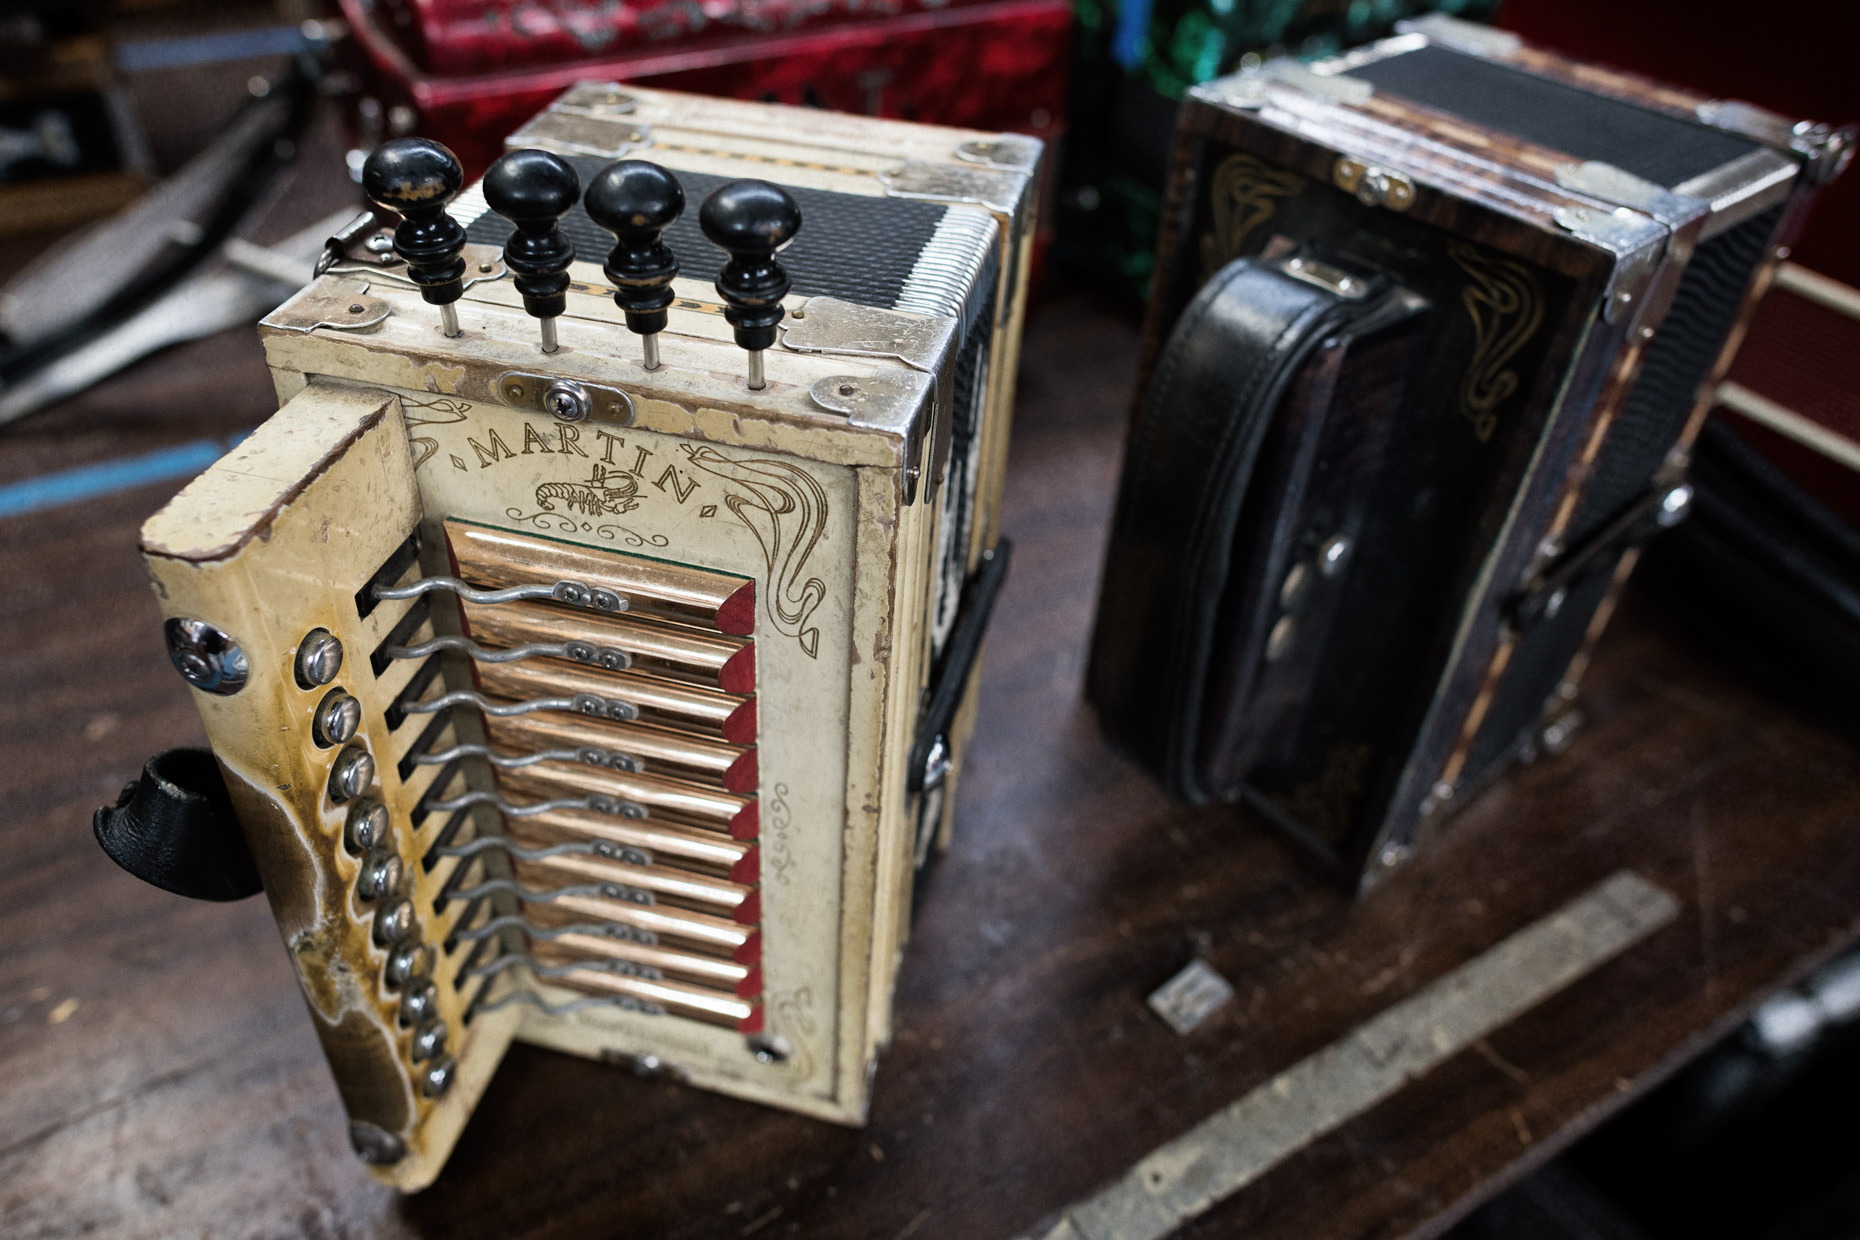 Martin Accordions by editorial photographer Kevin Brown.